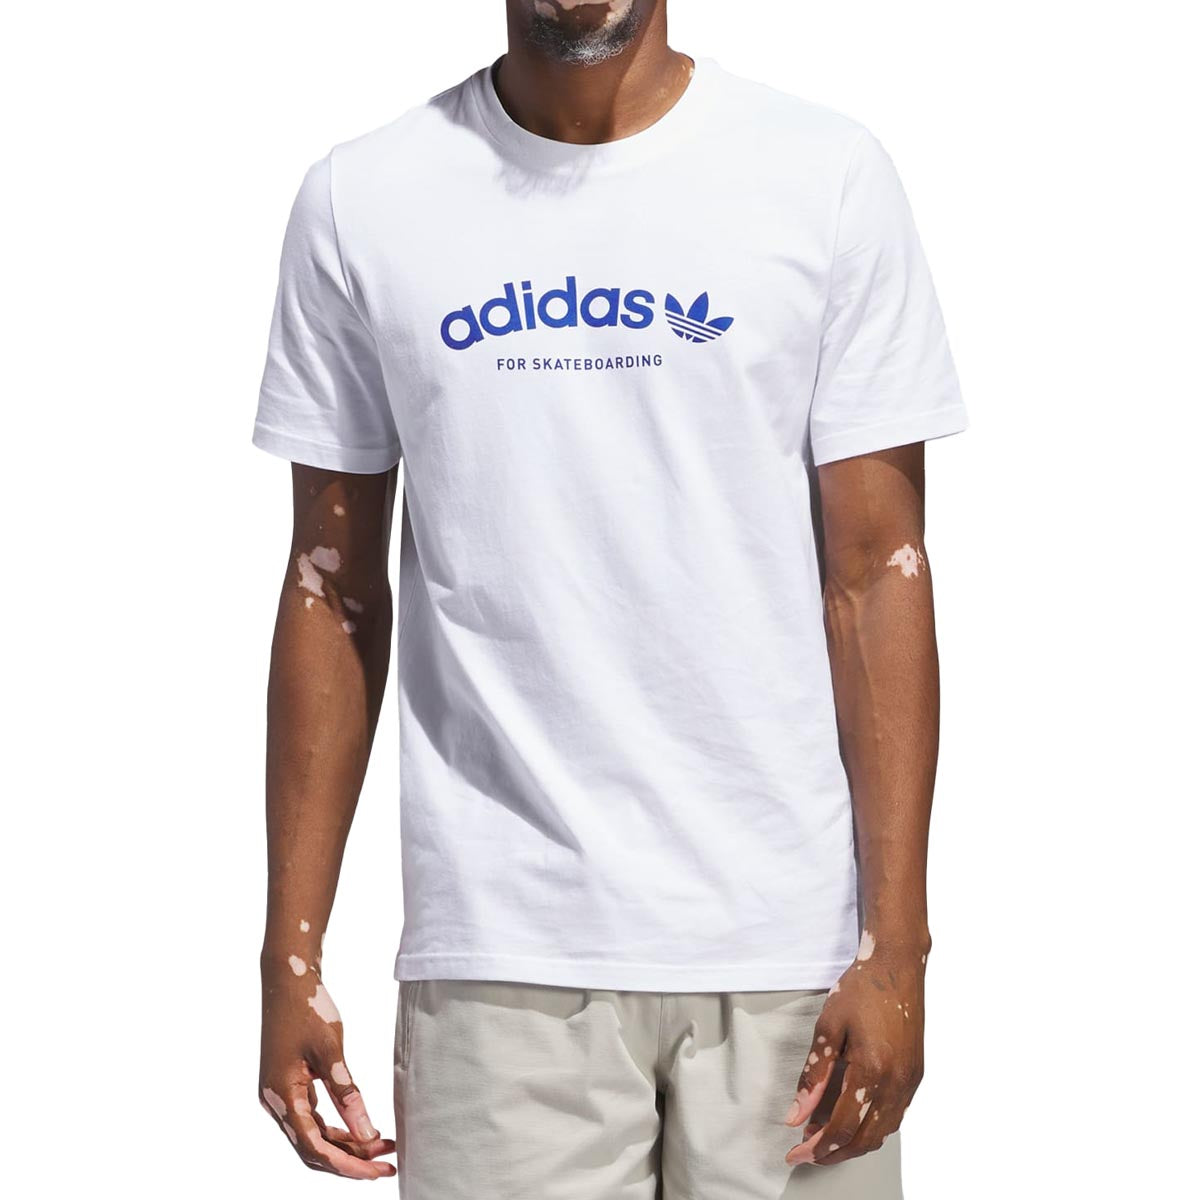 Adidas 4.0 Arched T-Shirt - White/Team Royal Blue image 2